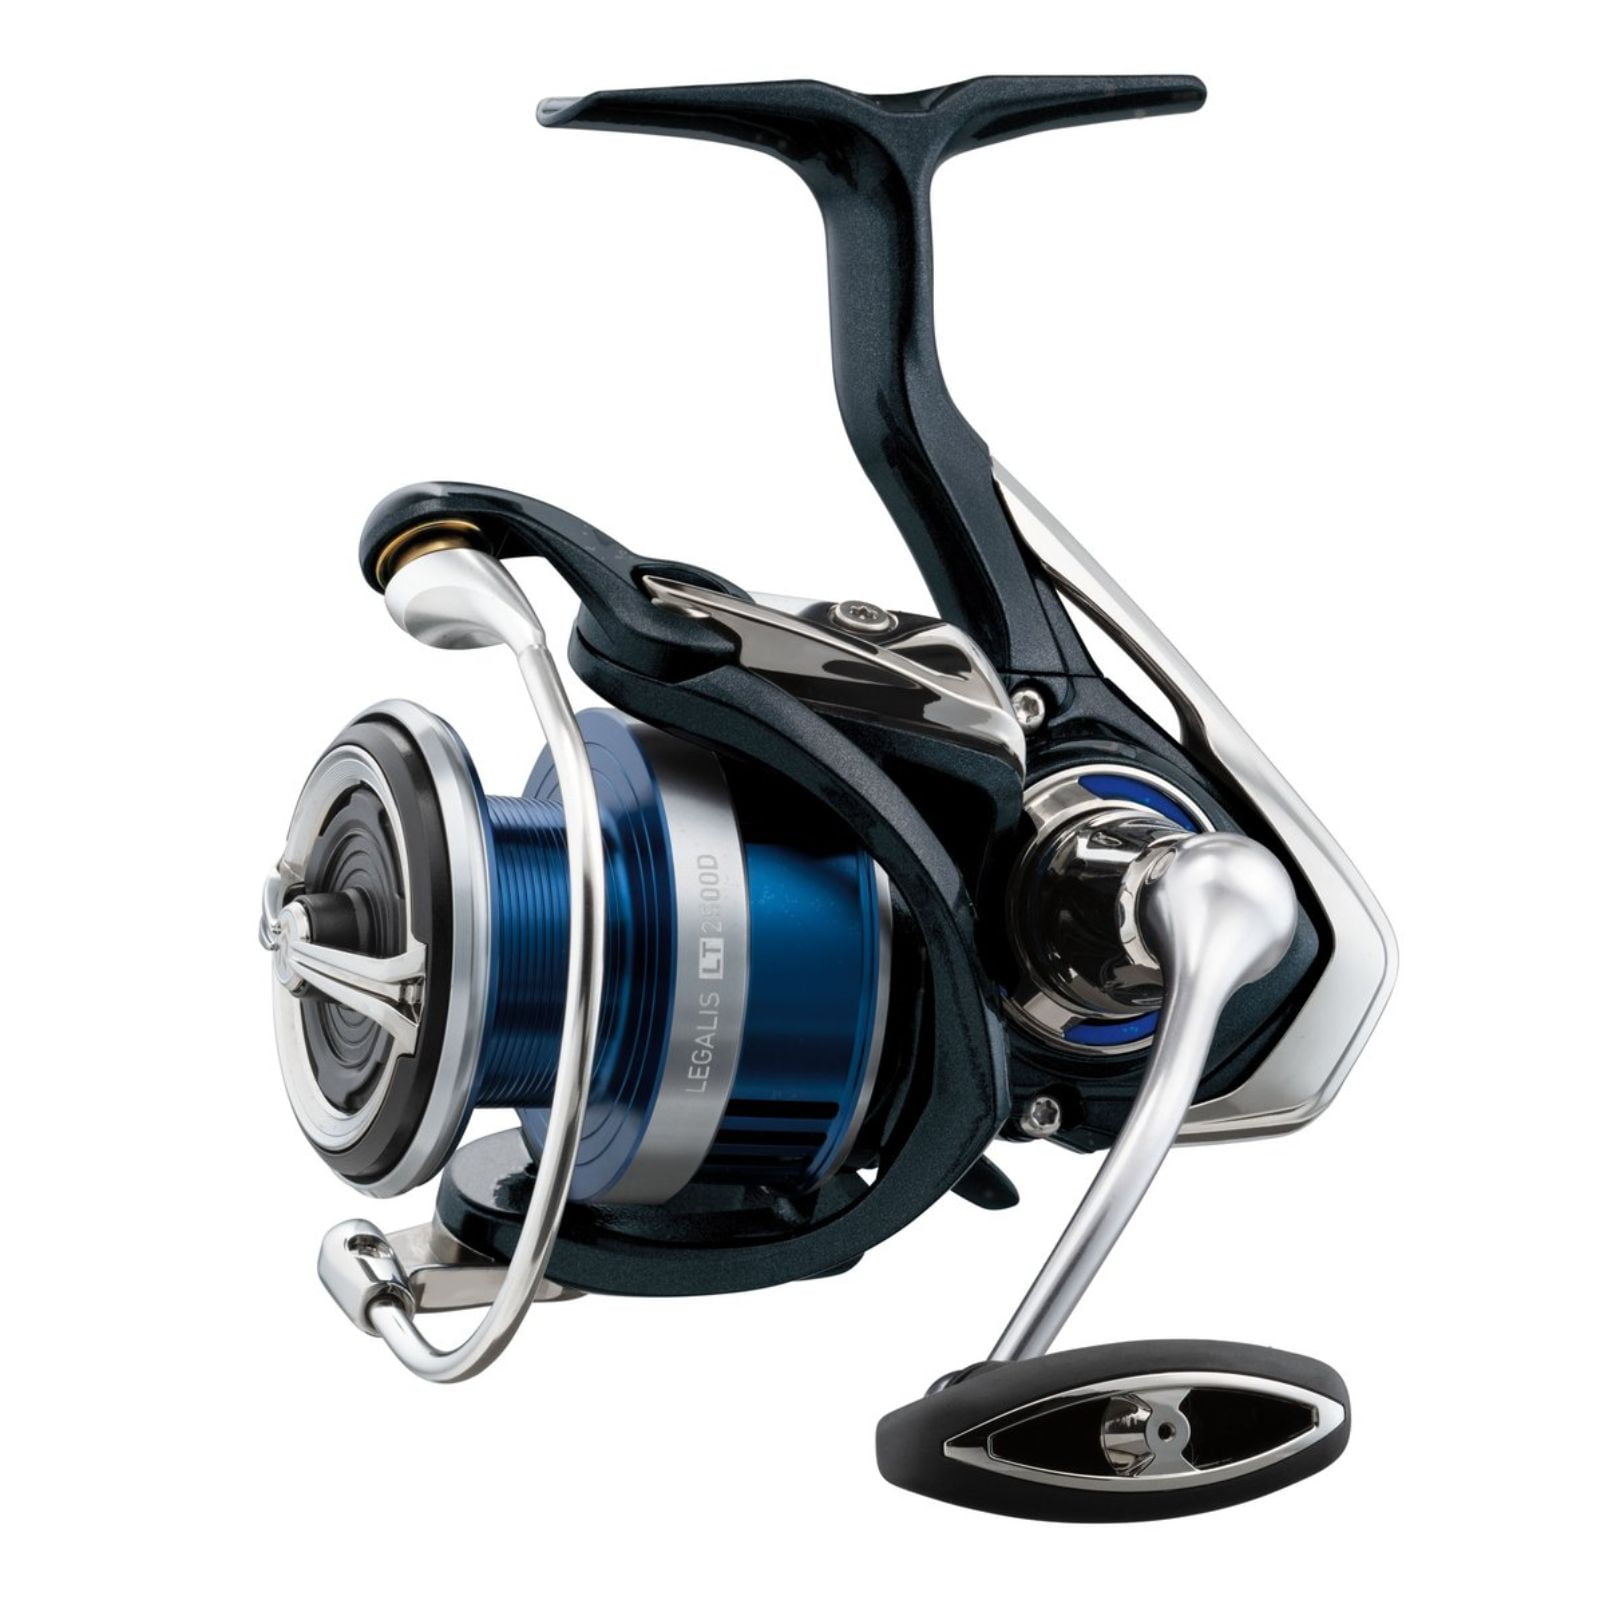 Daiwa Crossfire LT Spinning Reels Choose Size 1000, 2000, 2500 and 3000 "NEW" 